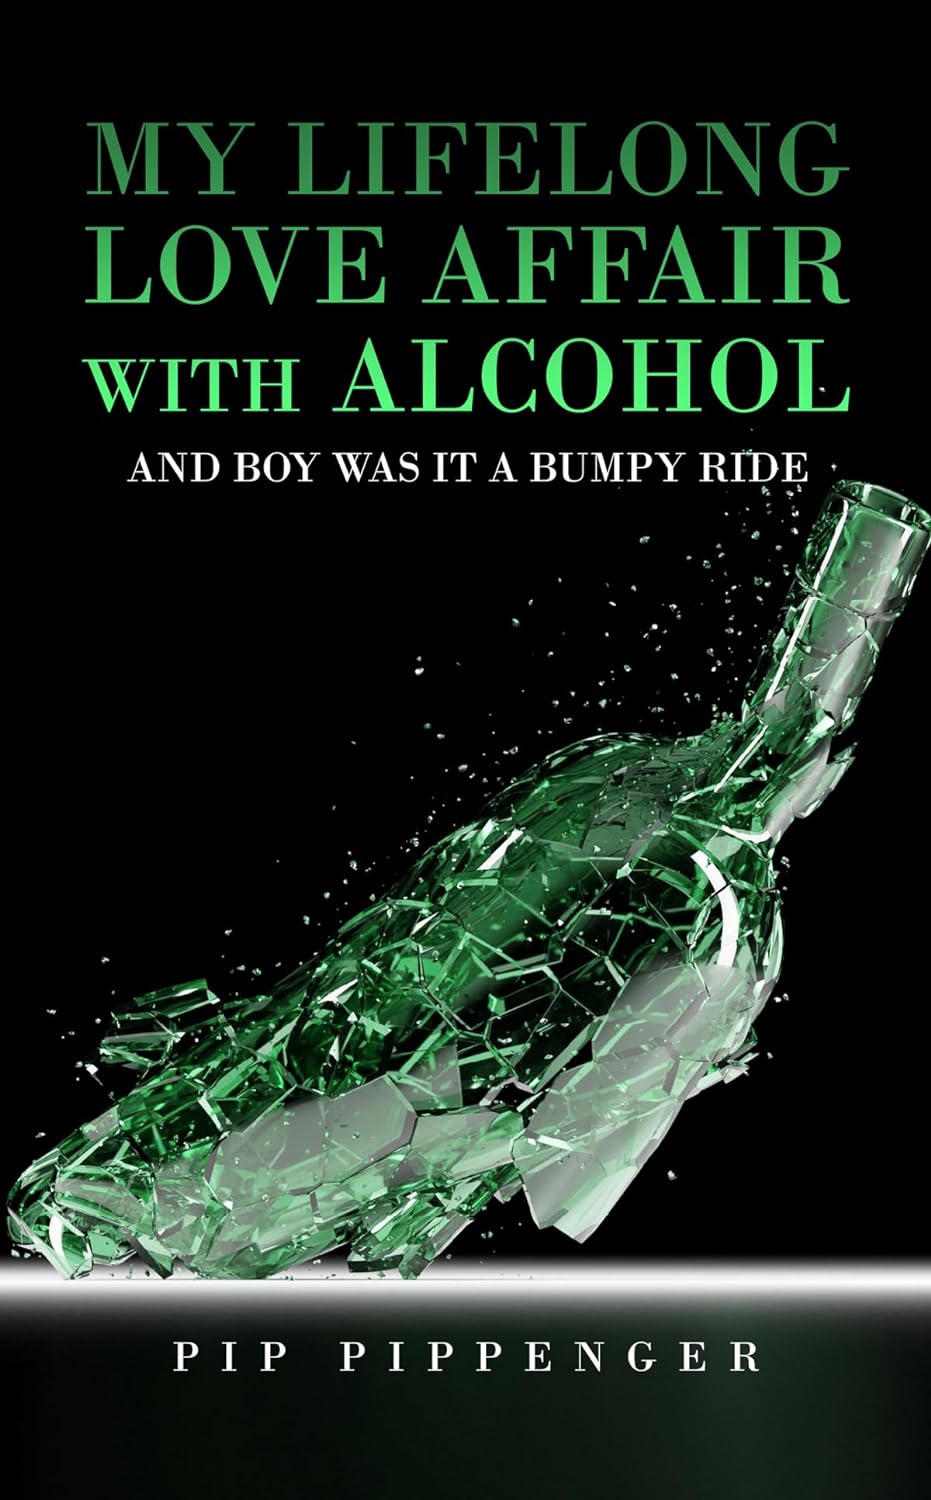 Pip Pippenger’s New Book Explores the Struggles and Triumphs of a Lifelong Battle With Alcoholism